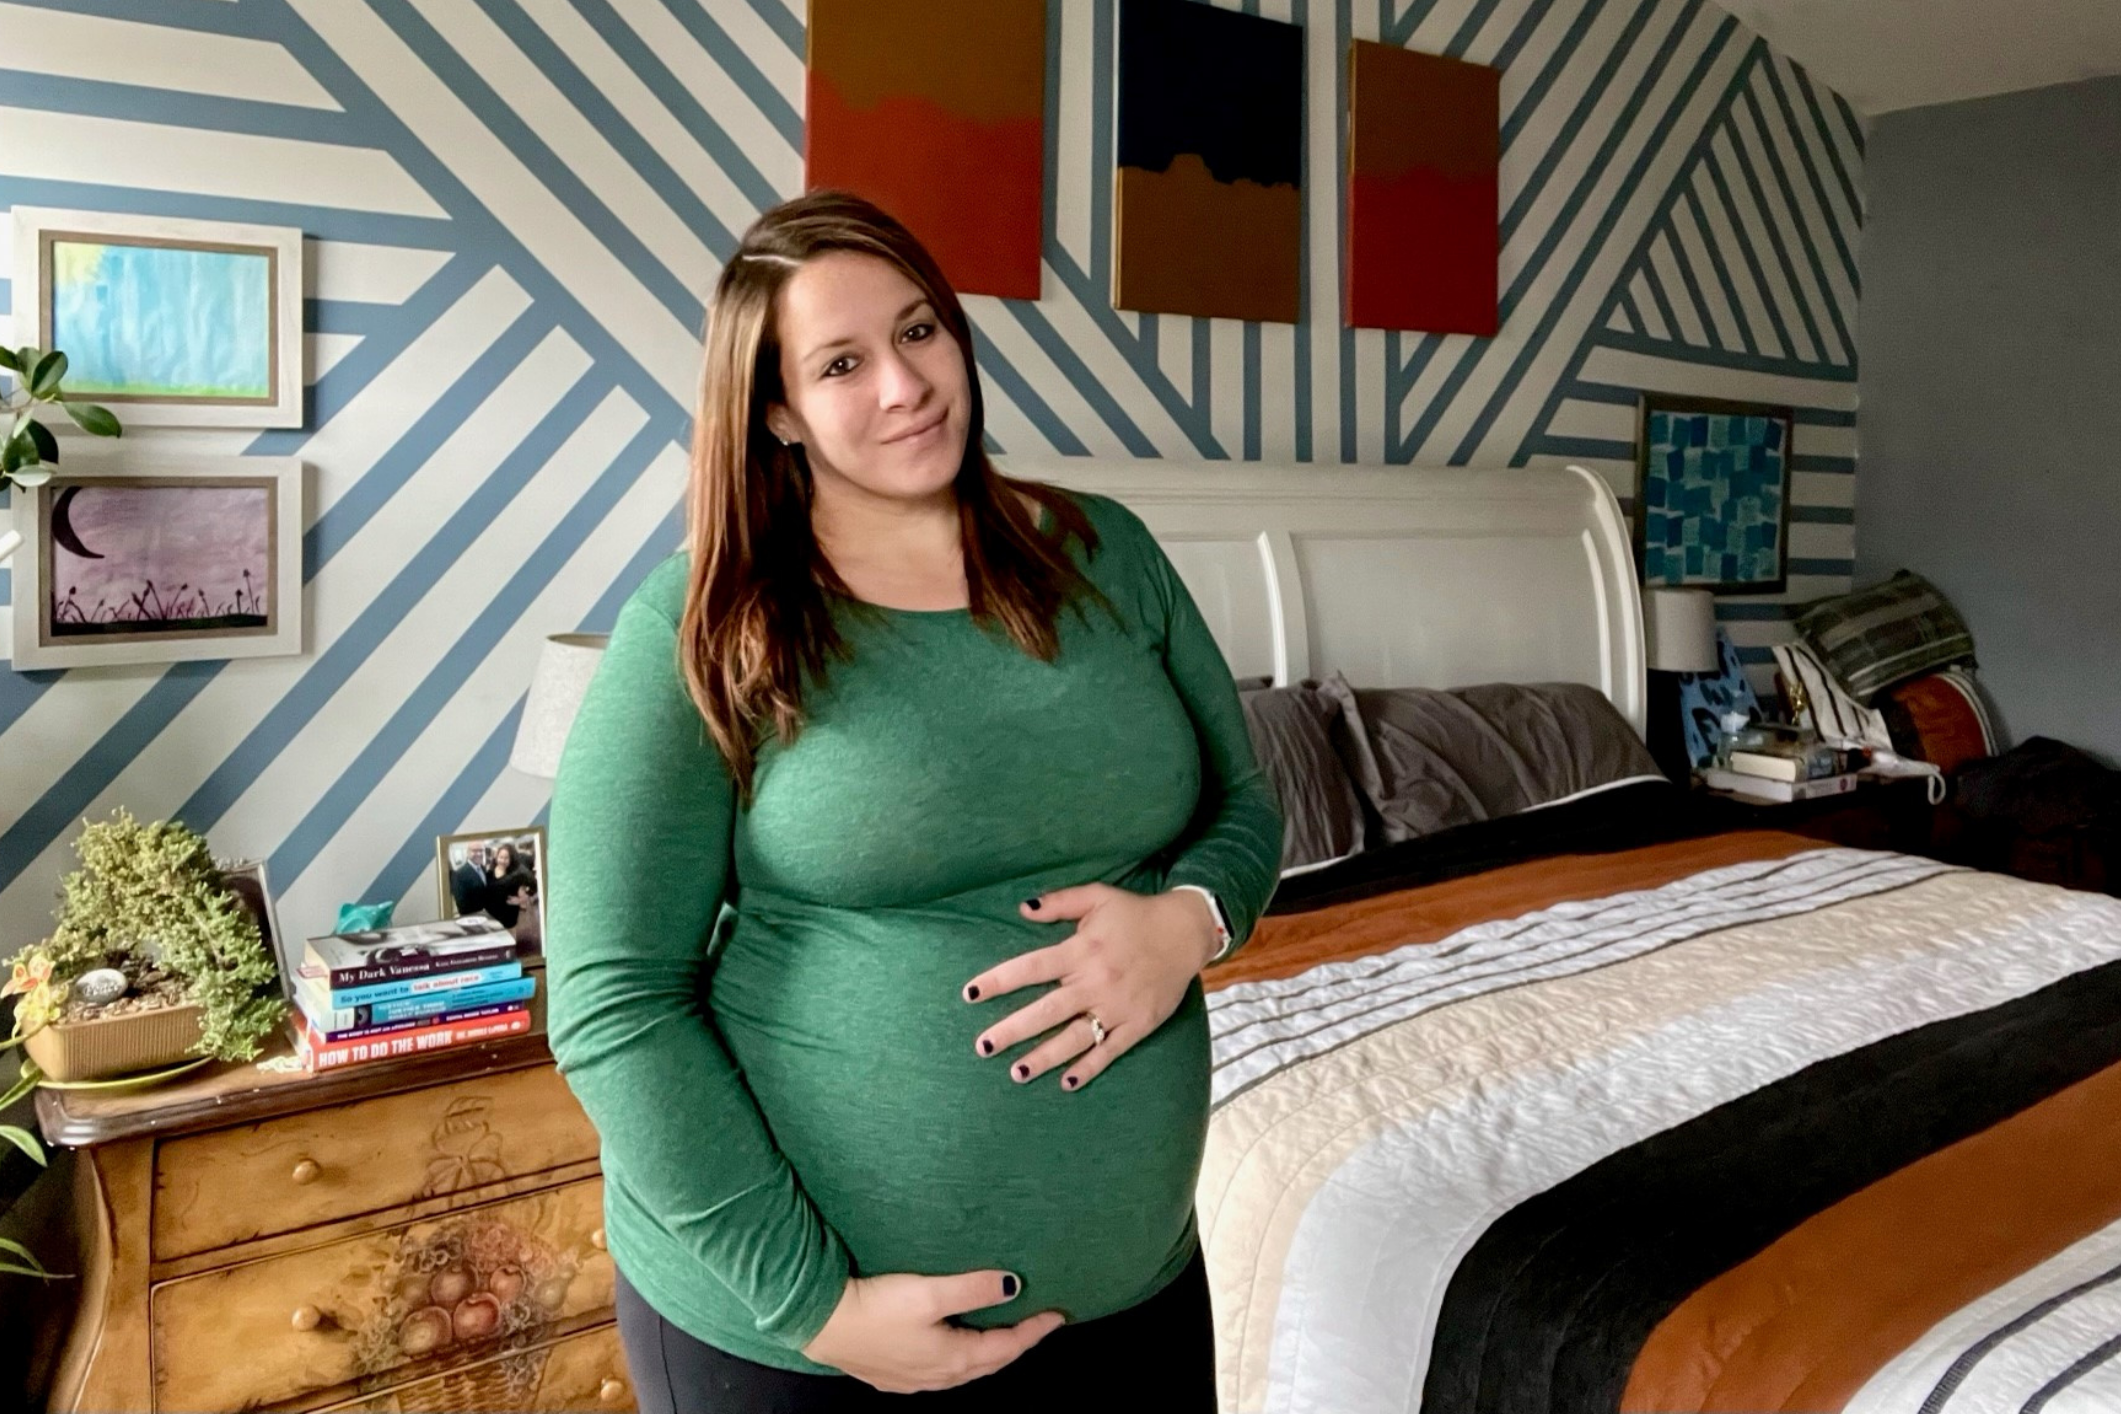 Pregnant mom cradles her belly, wearing a green long sleeve shirt, standing in a bedroom with striped walls and striped bedding.